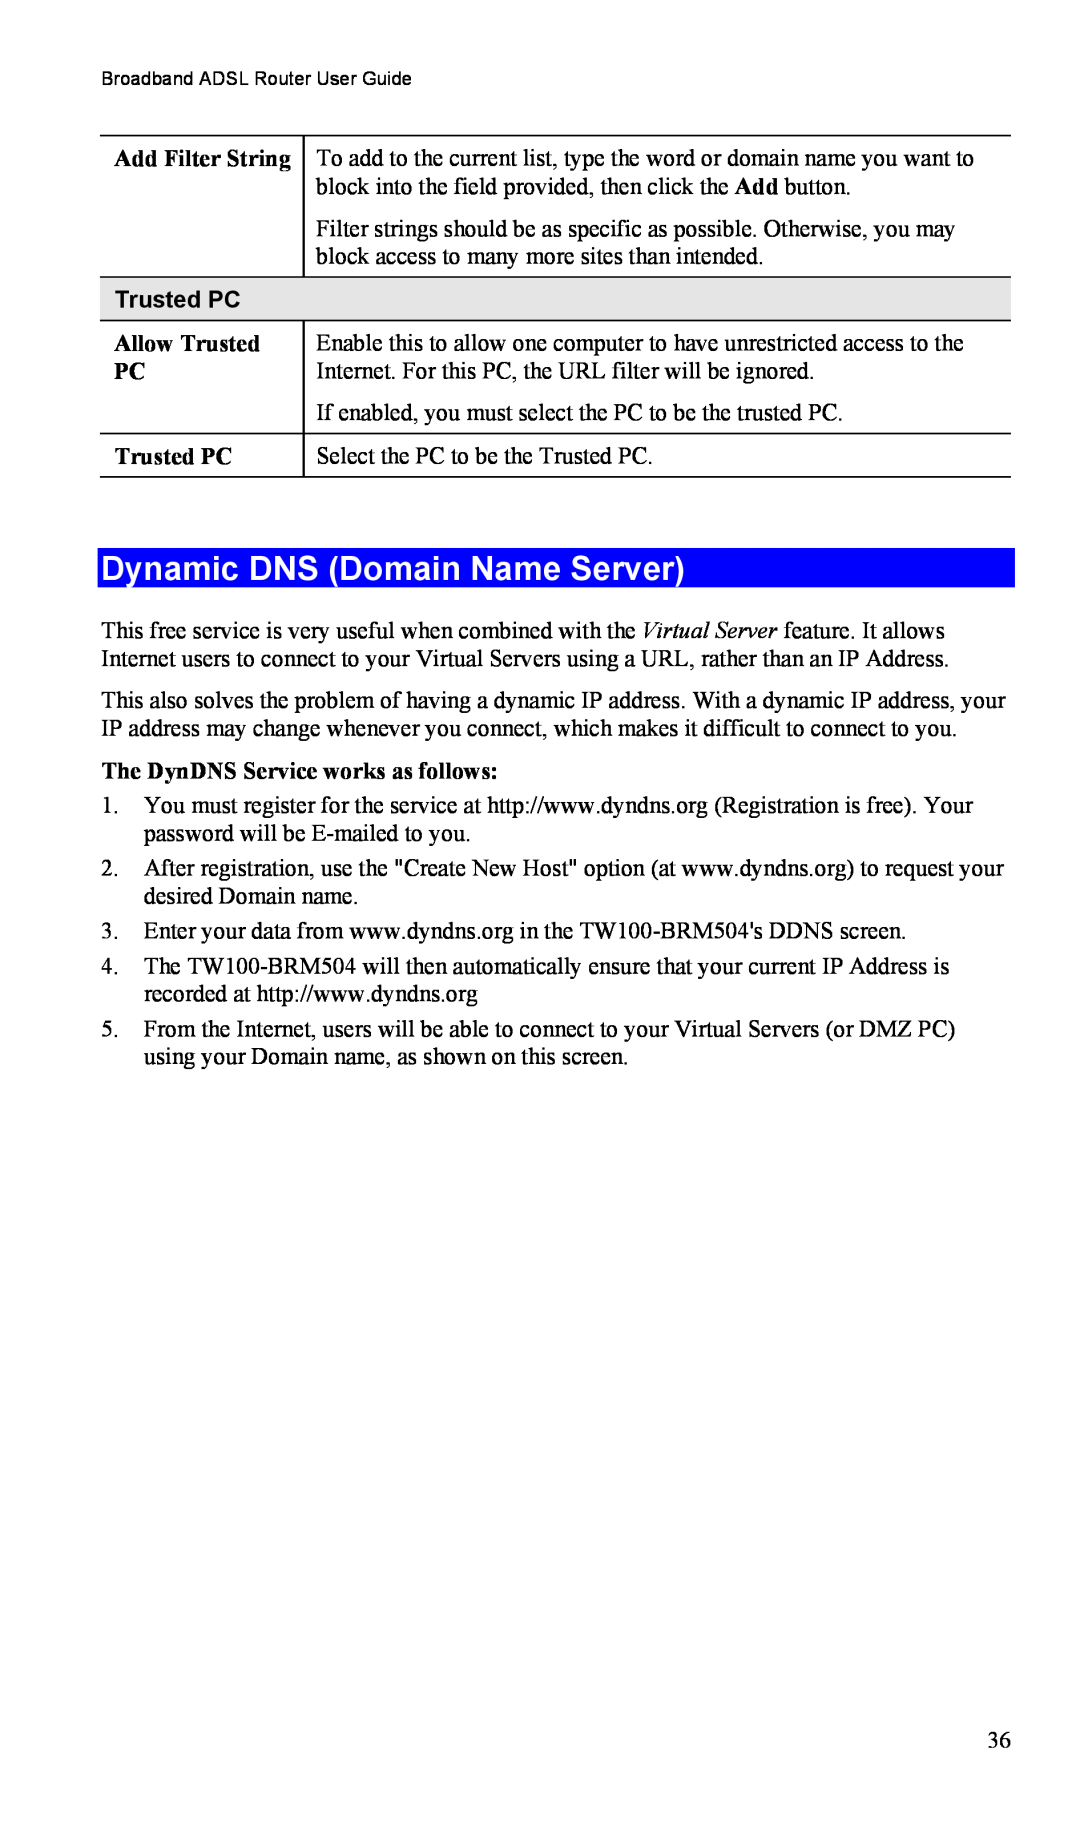 TRENDnet TW100-BRM504 manual Dynamic DNS Domain Name Server, Add Filter String, Trusted PC, Allow Trusted 